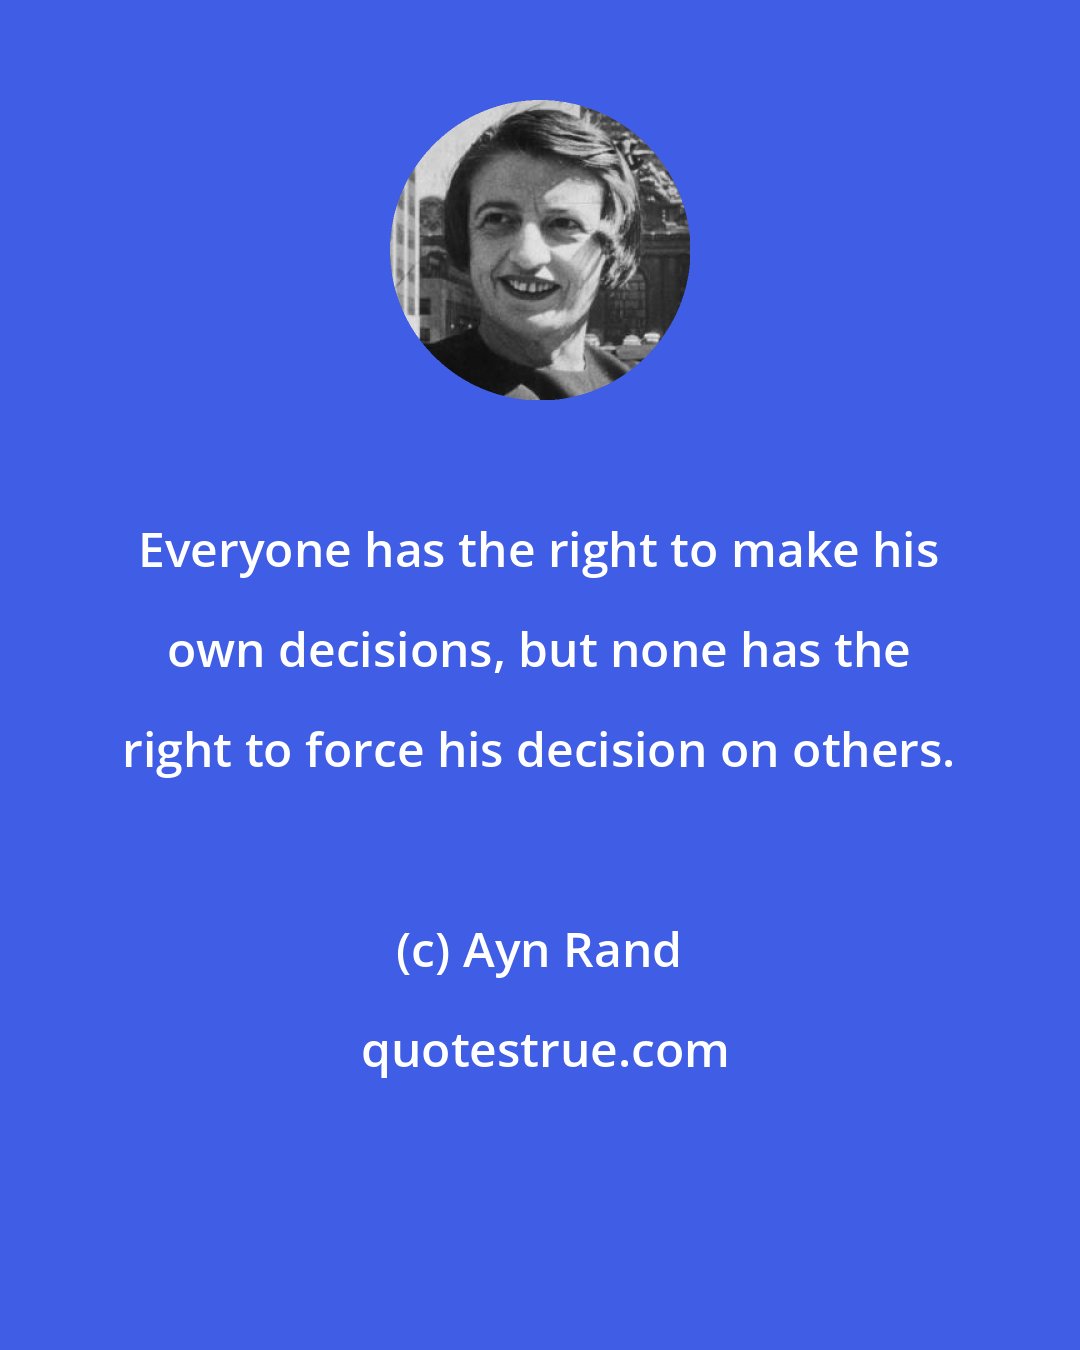 Ayn Rand: Everyone has the right to make his own decisions, but none has the right to force his decision on others.